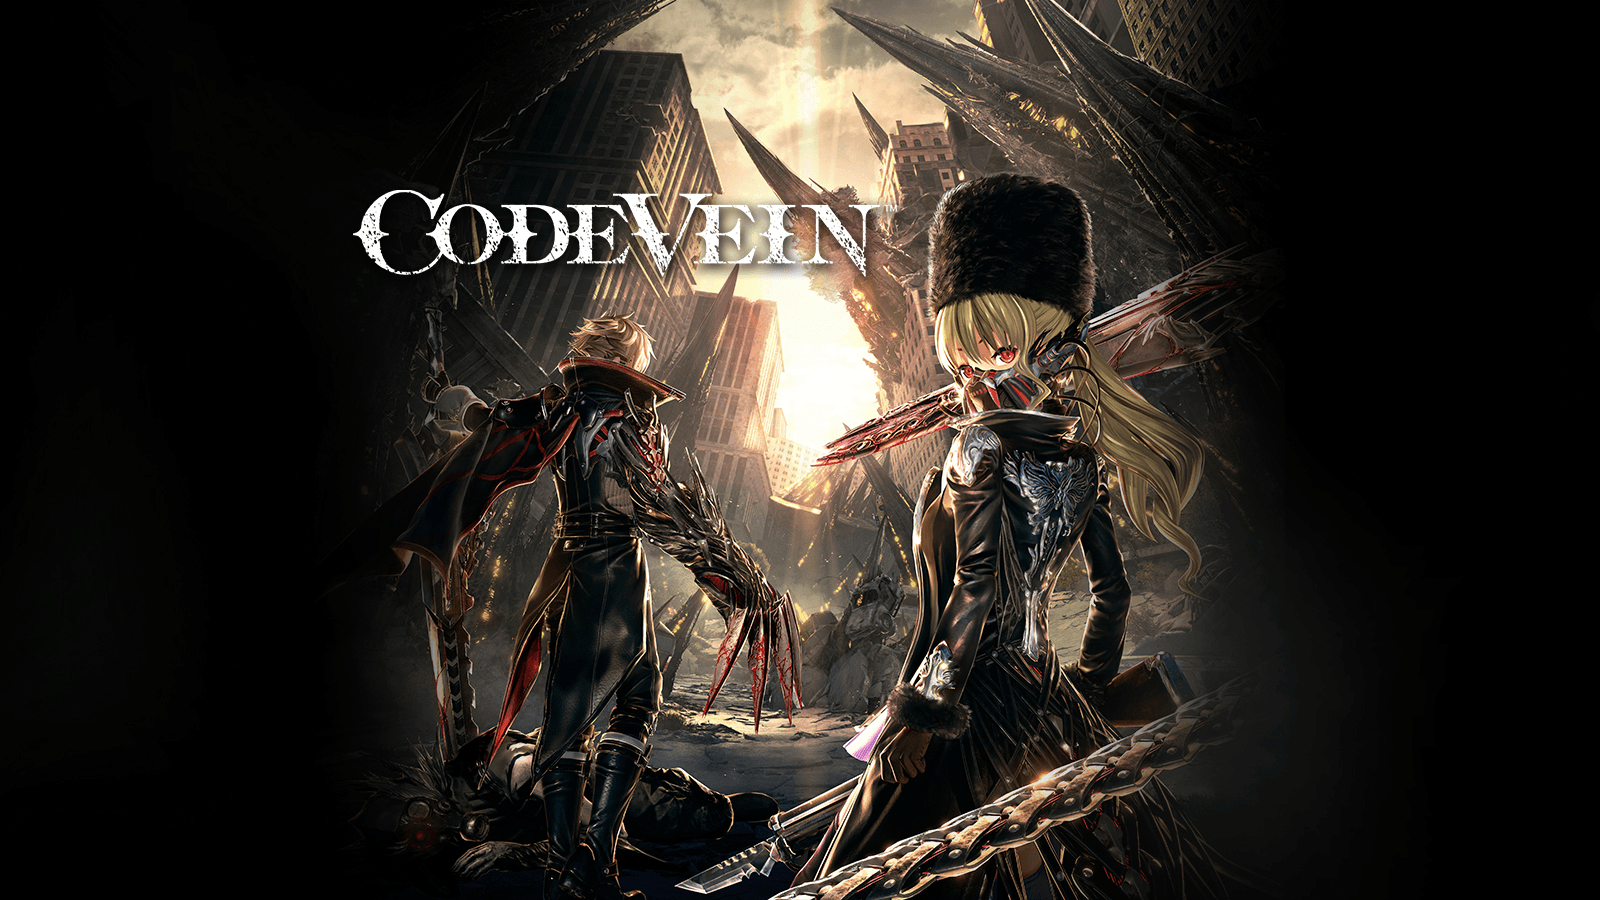 Code Vein New Screenshots Showcase Characters, Combat And More A